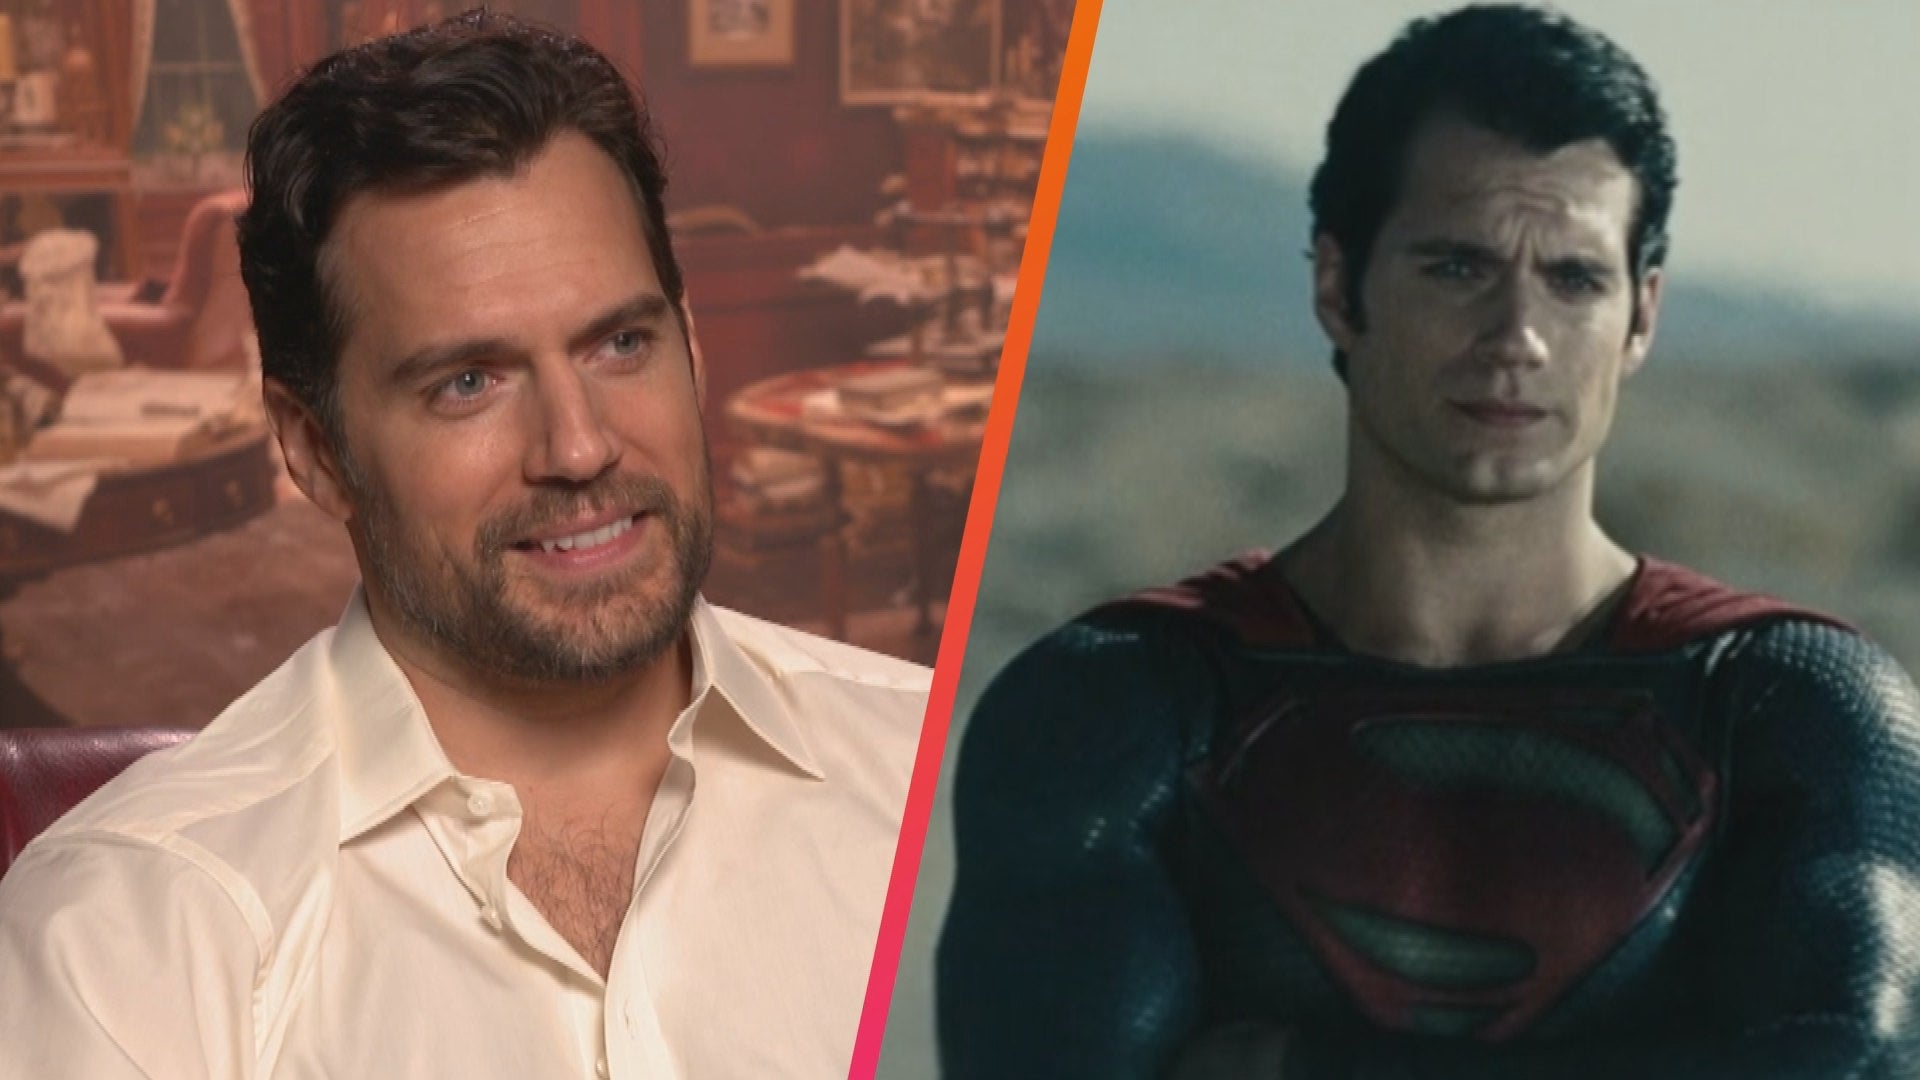 Henry Cavill fans react to him being dropped as Superman